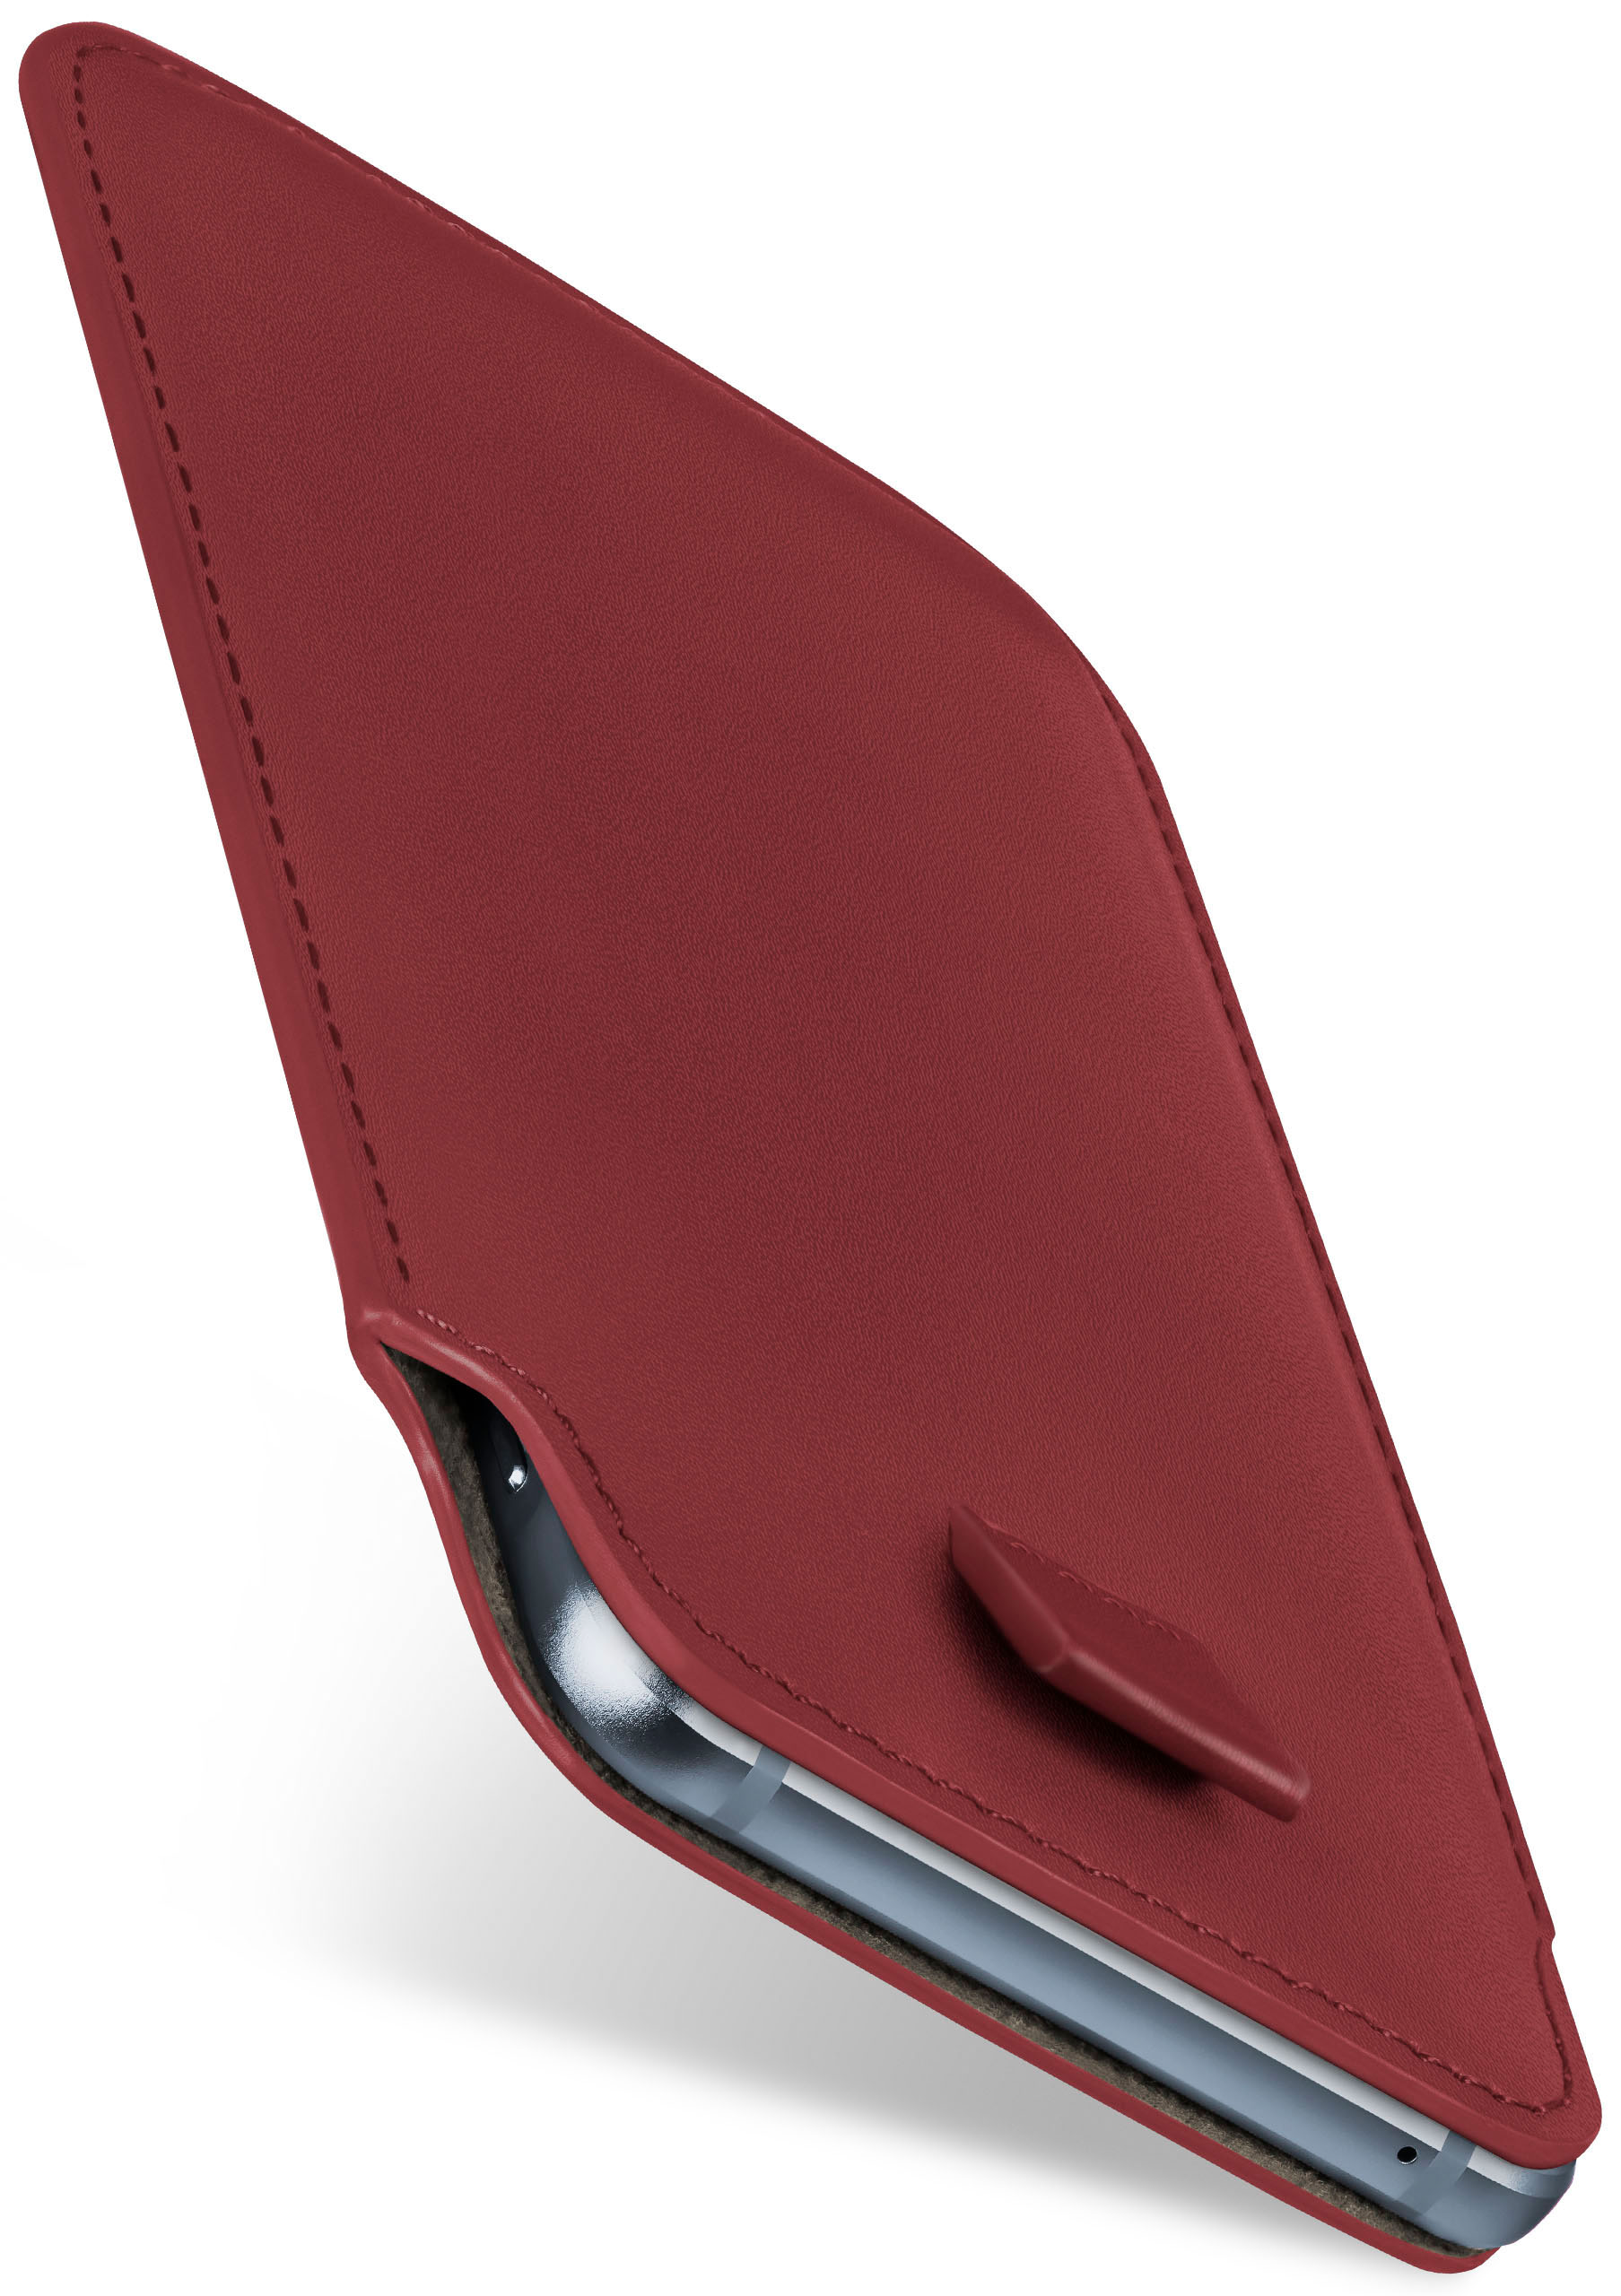 MOEX Slide Full One, OnePlus, Maroon-Red Cover, Case